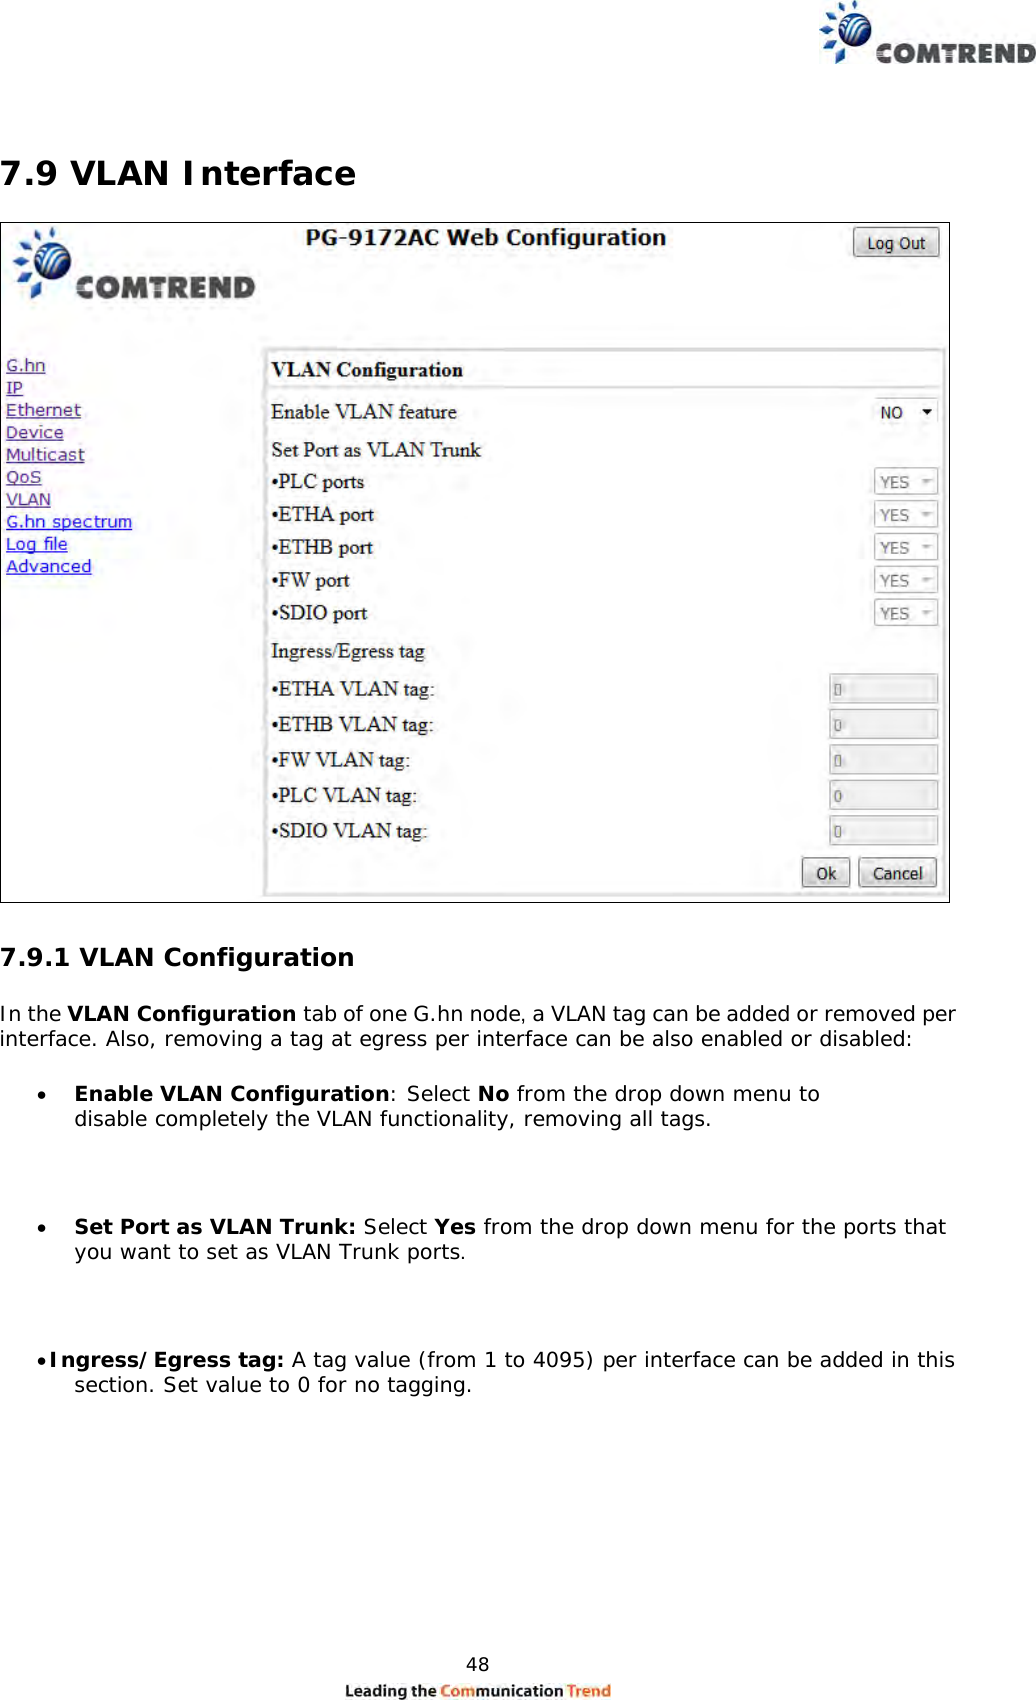  48    7.9 VLAN Interface   7.9.1 VLAN Configuration  In the VLAN Configuration tab of one G.hn node, a VLAN tag can be added or removed per interface. Also, removing a tag at egress per interface can be also enabled or disabled:   Enable VLAN Configuration: Select No from the drop down menu to disable completely the VLAN functionality, removing all tags.    Set Port as VLAN Trunk: Select Yes from the drop down menu for the ports that you want to set as VLAN Trunk ports.   Ingress/Egress tag: A tag value (from 1 to 4095) per interface can be added in this section. Set value to 0 for no tagging. 